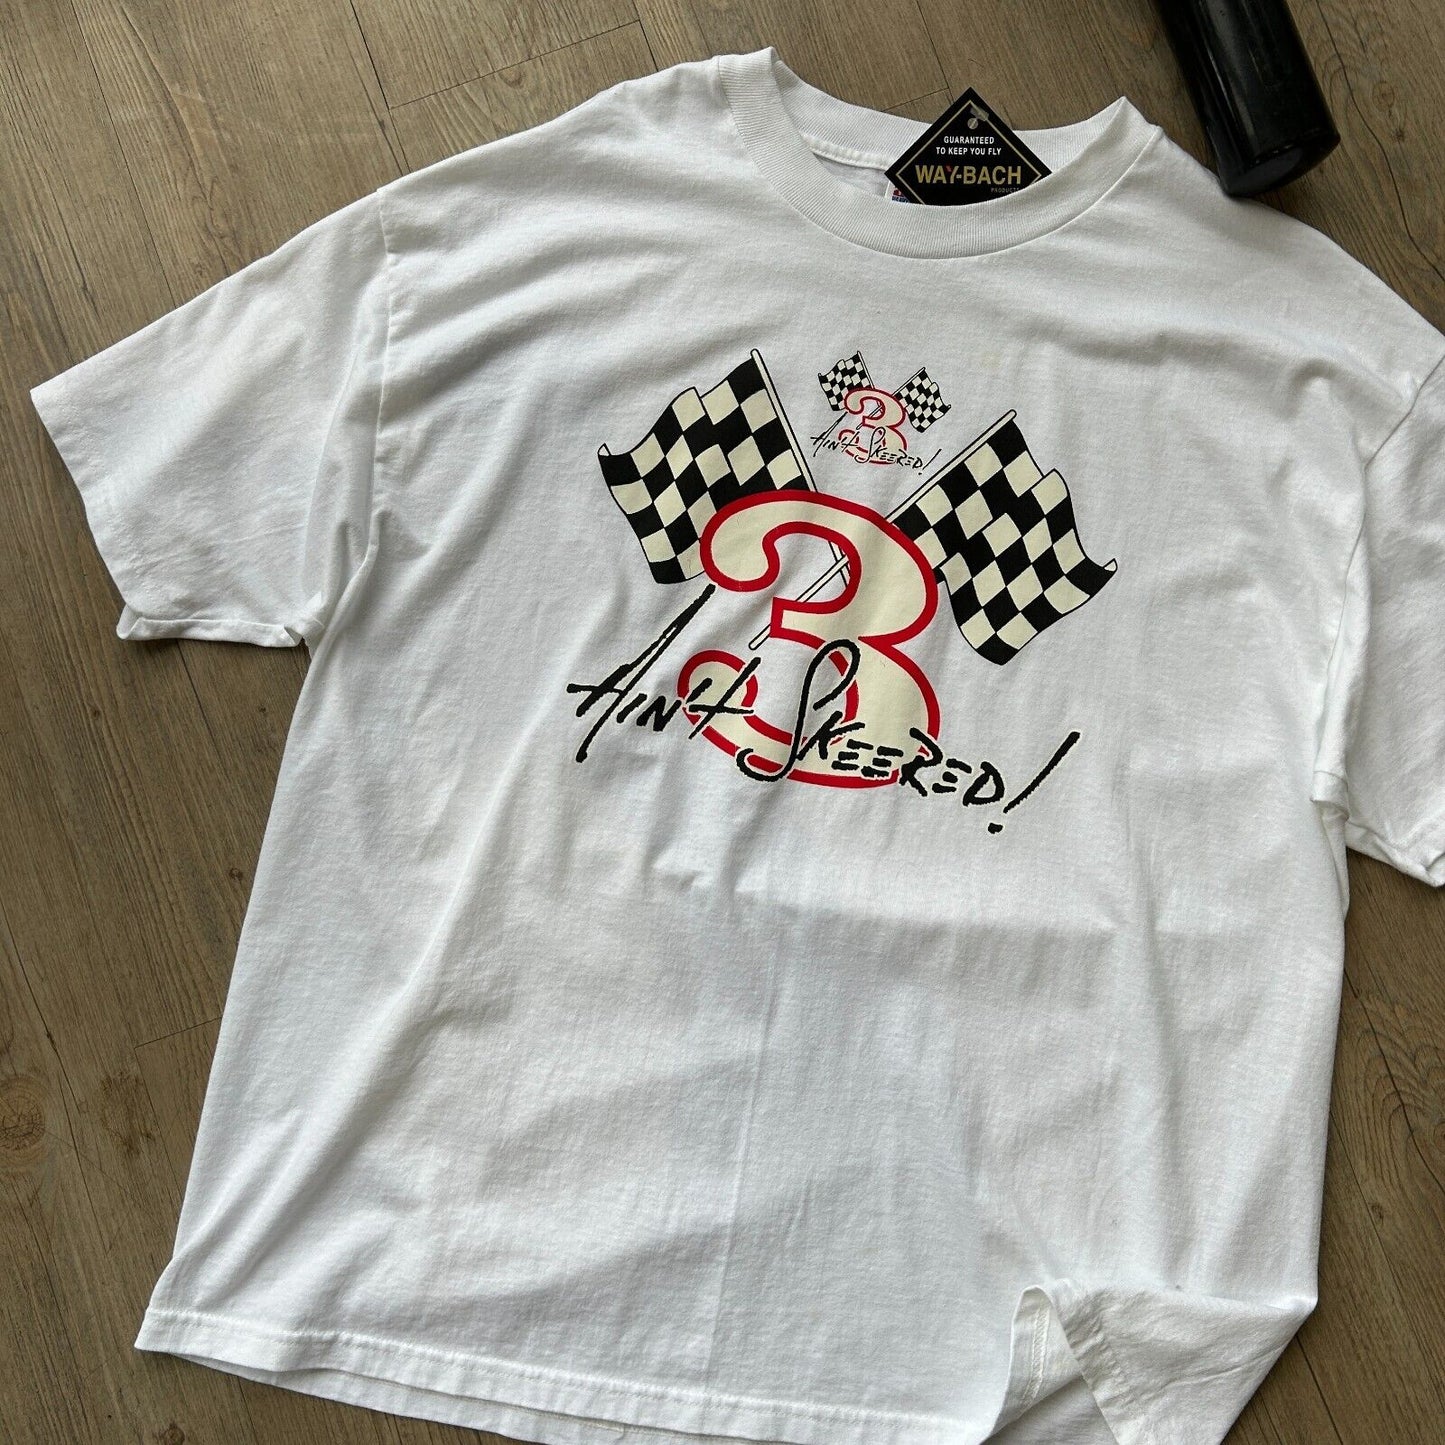 VINTAGE 1997 | Aint Skee Red! Racing Flags White T-Shirt sz XL Adult